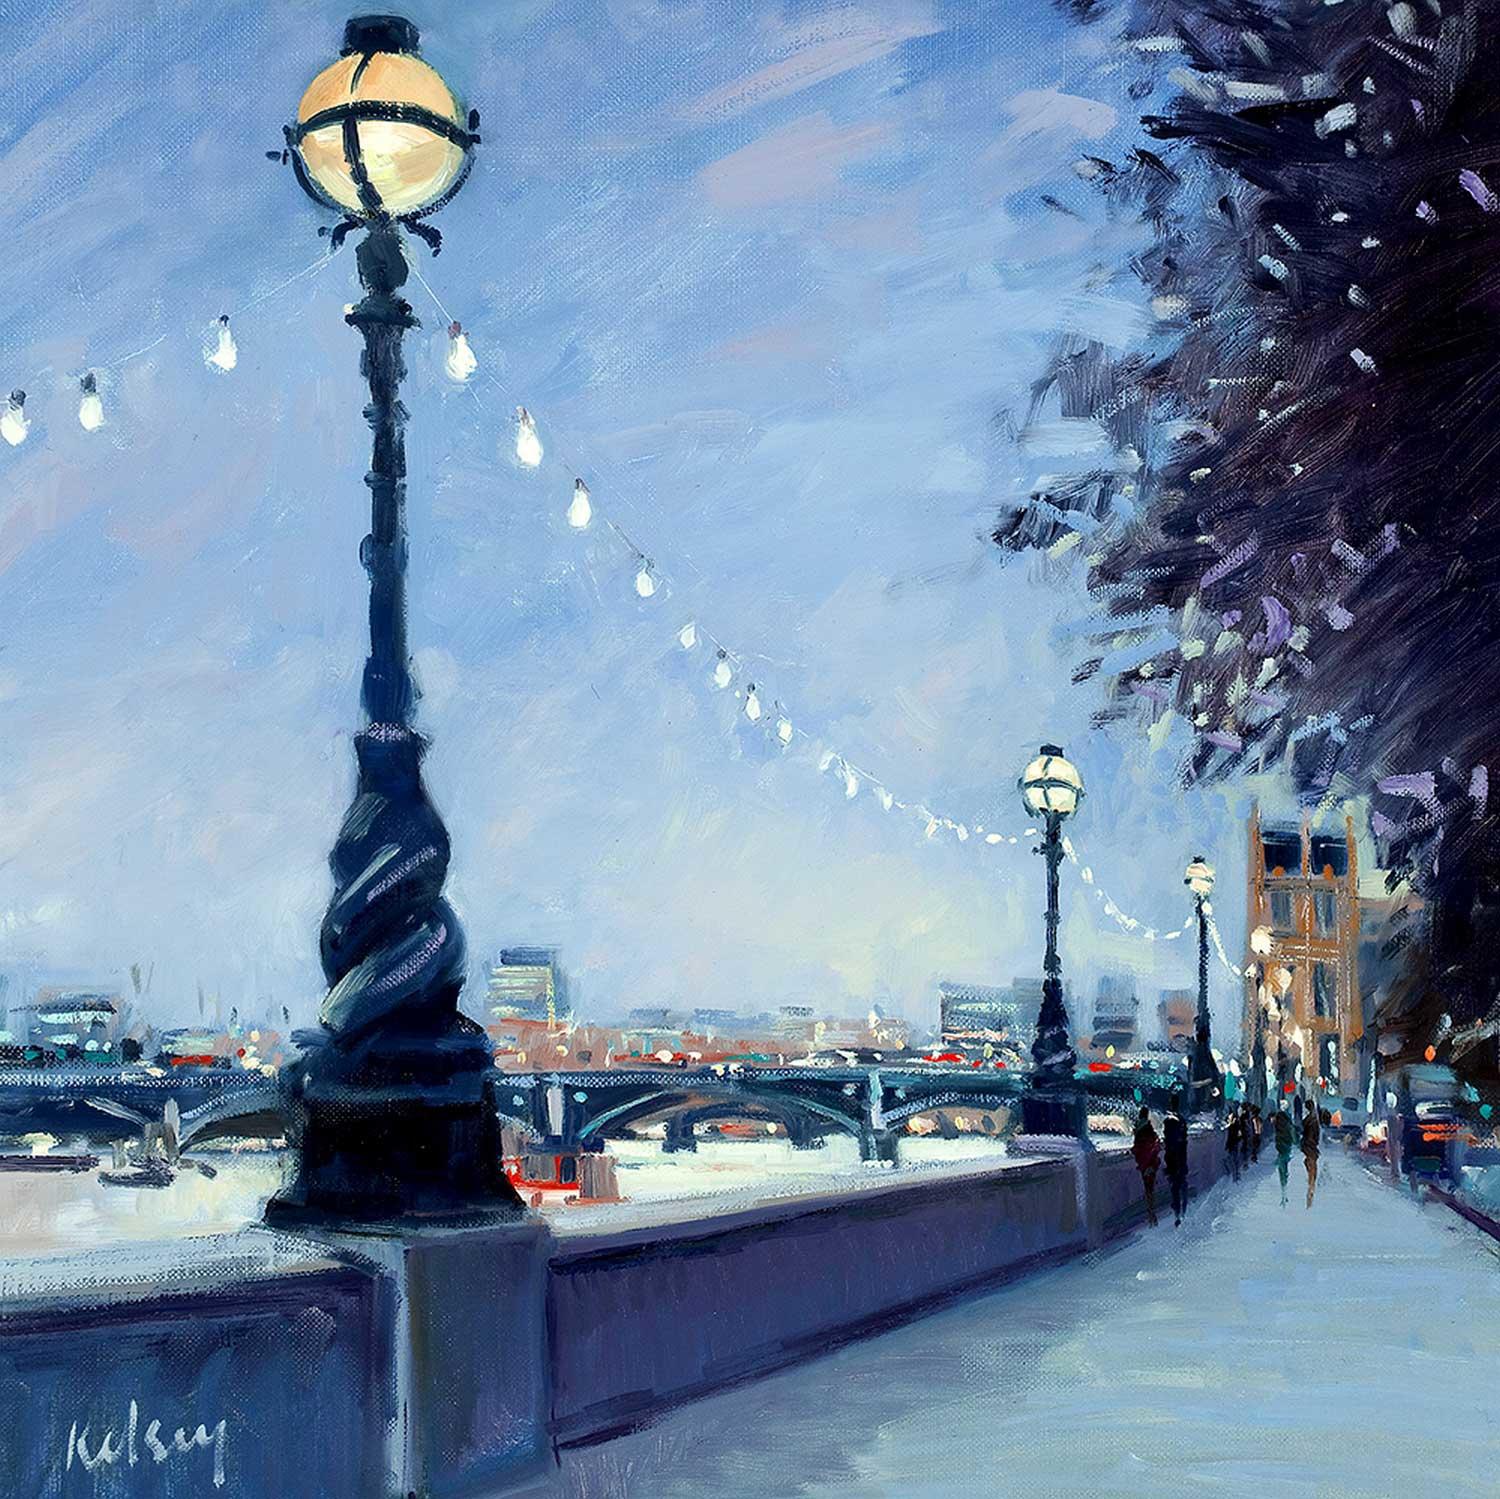 The Embankment by Night by artist Robert Kelsey